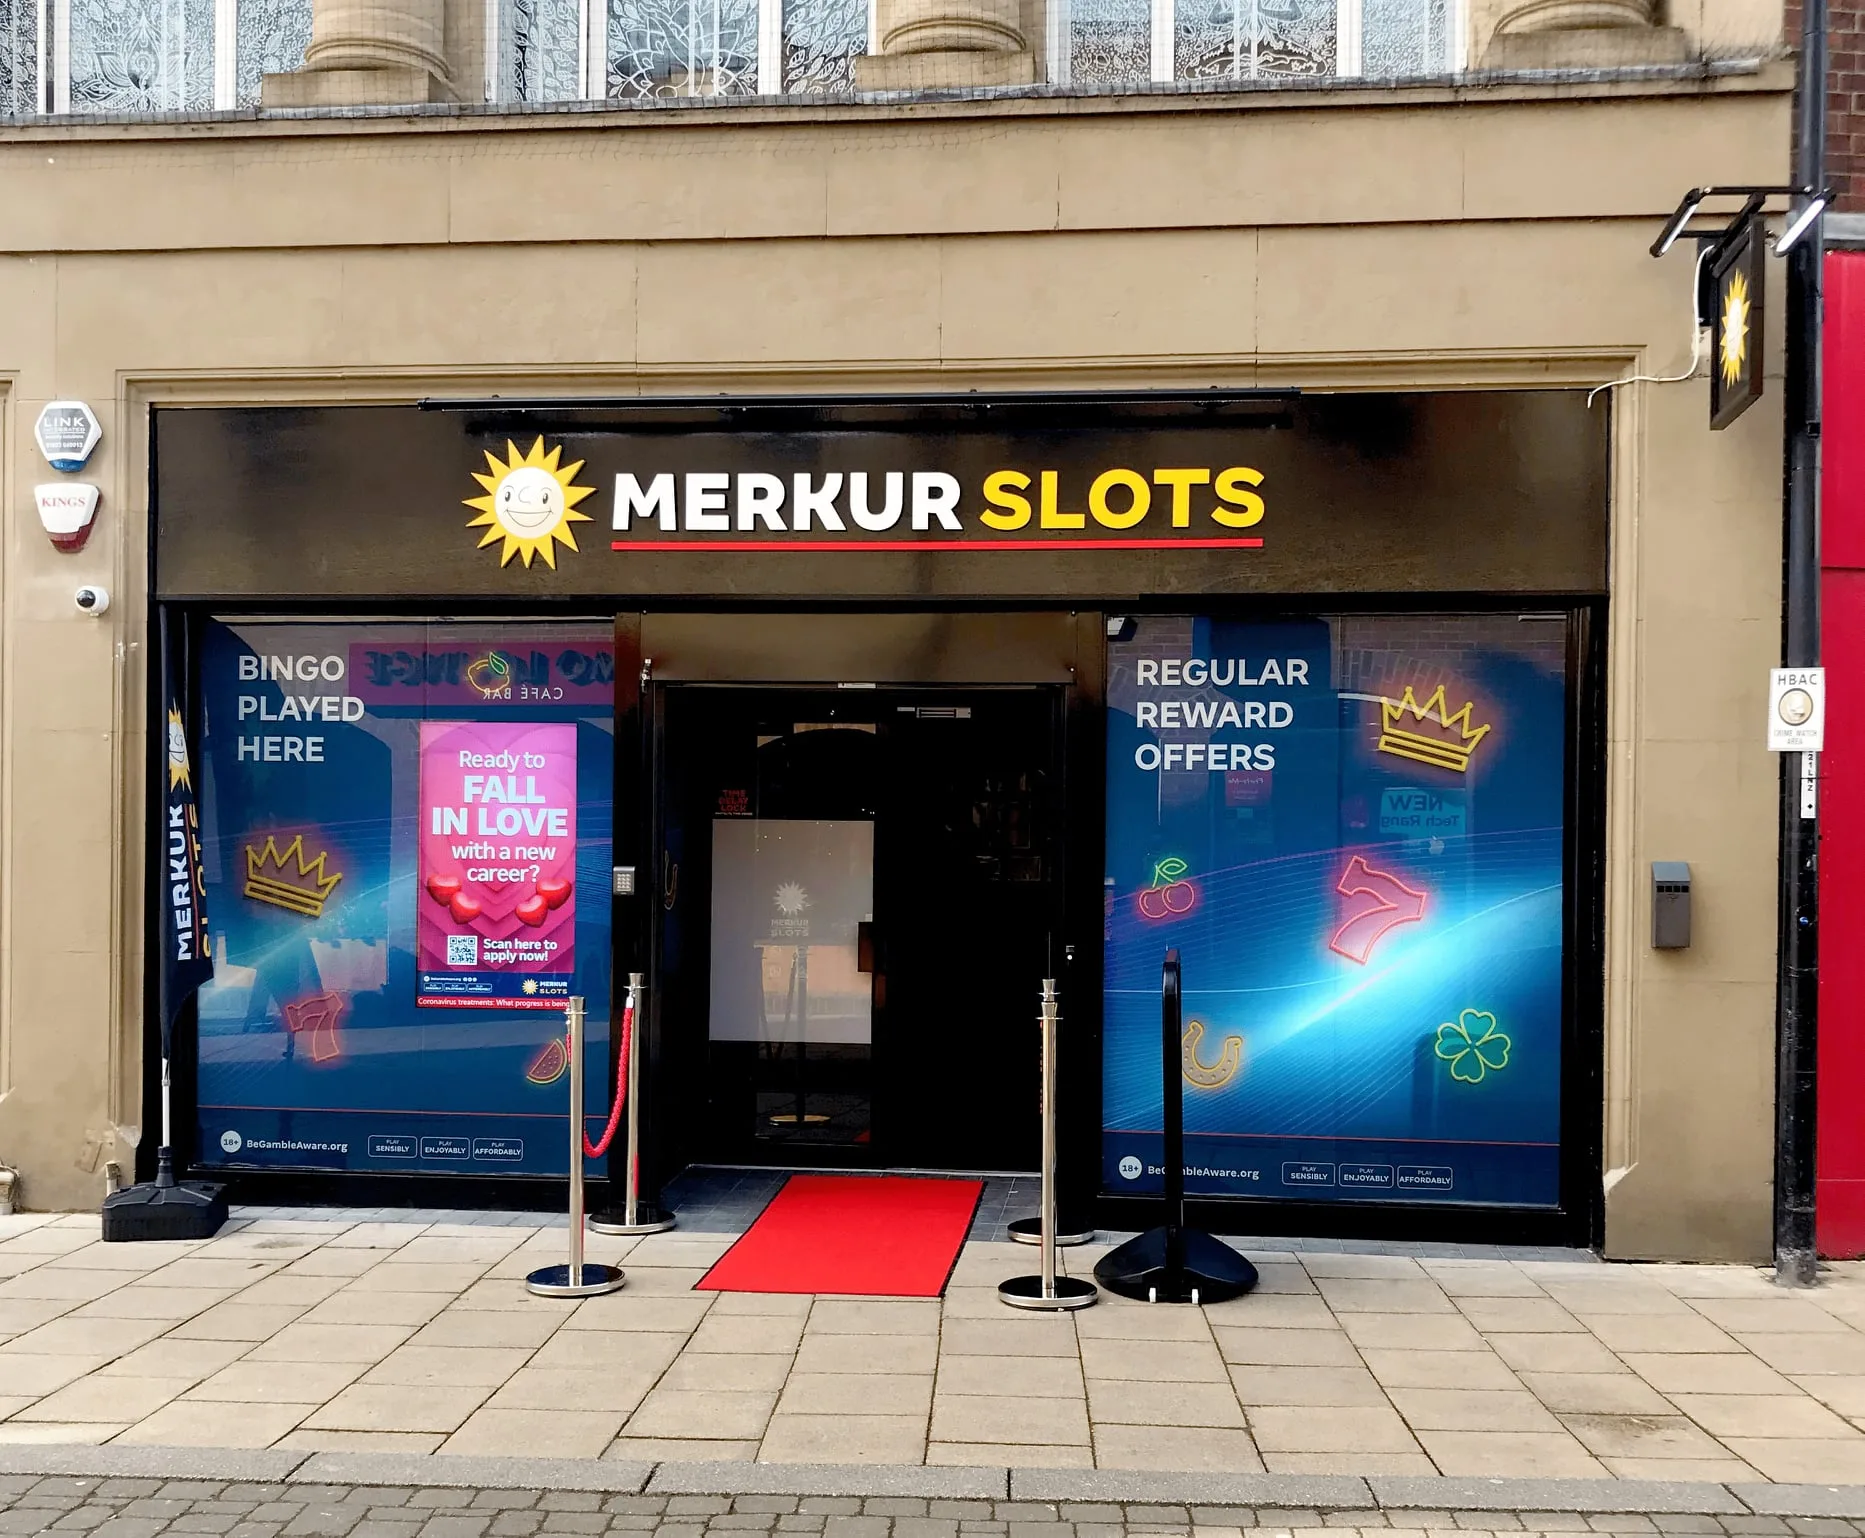 Merkur Slots has been permission for a trial period of two years to stay open all night at Huntingdon.